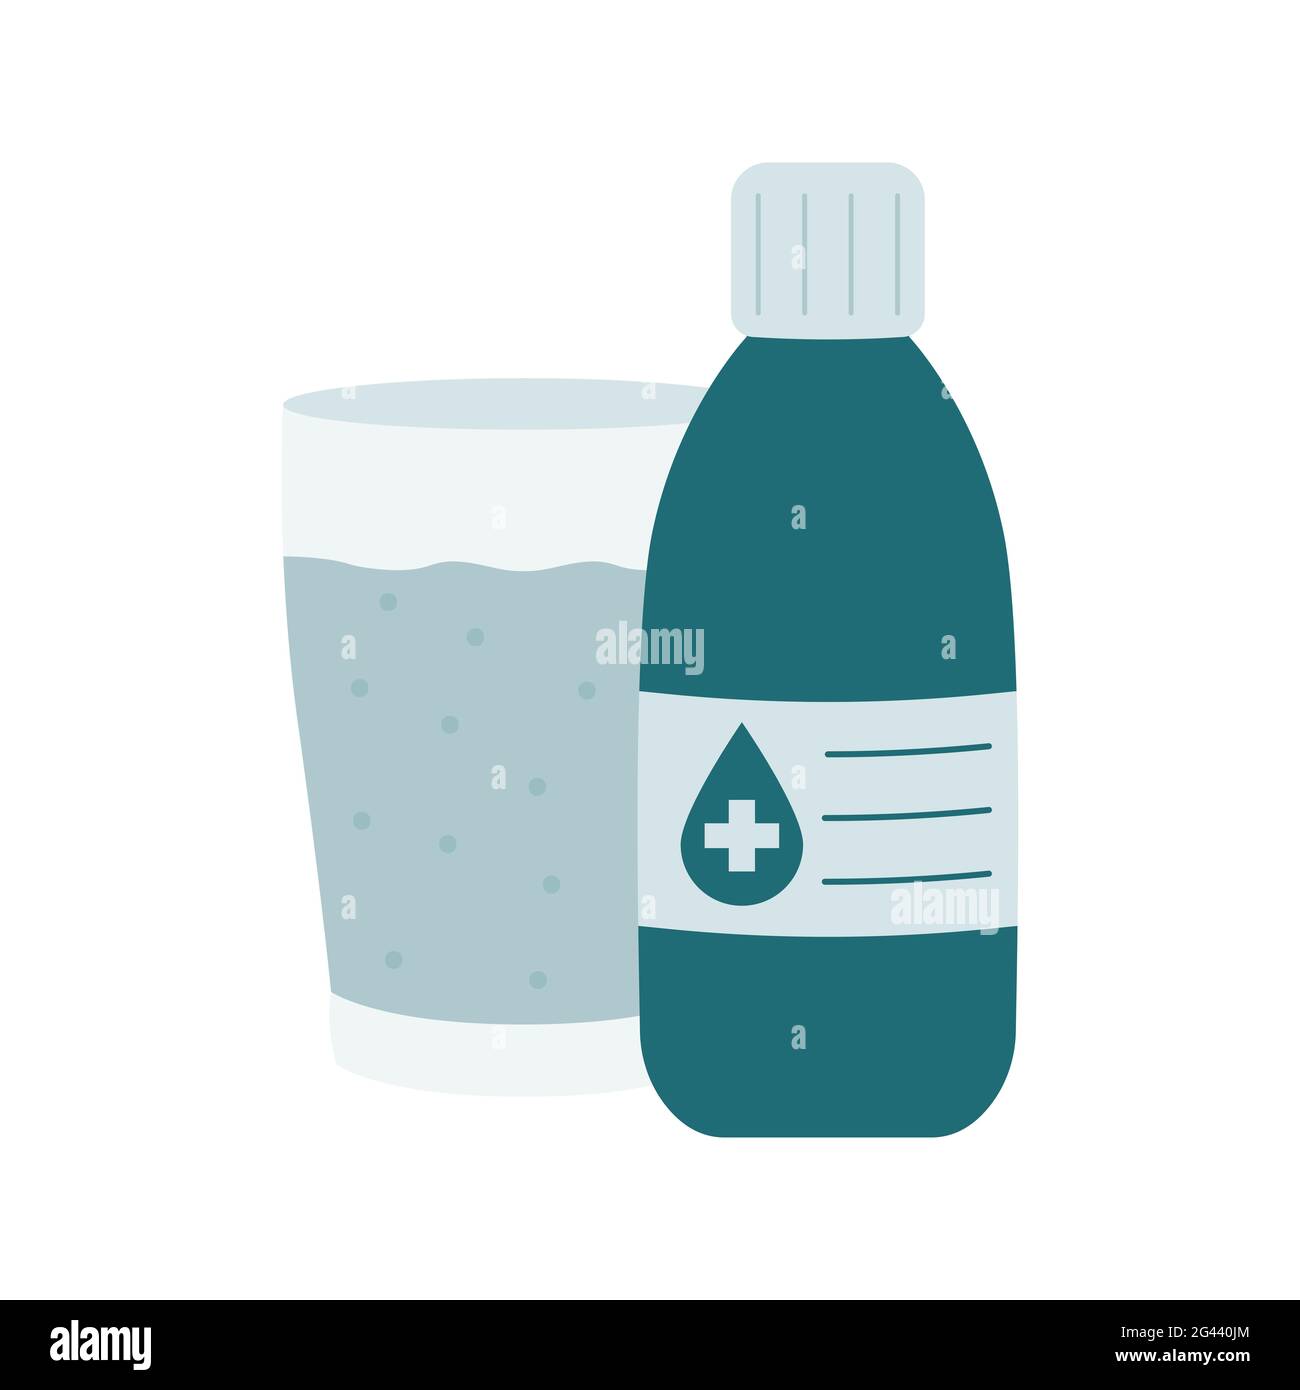 Antiseptic or Antibacterial mouthwash. Vector illustration of a medical remedy. Stock Photo